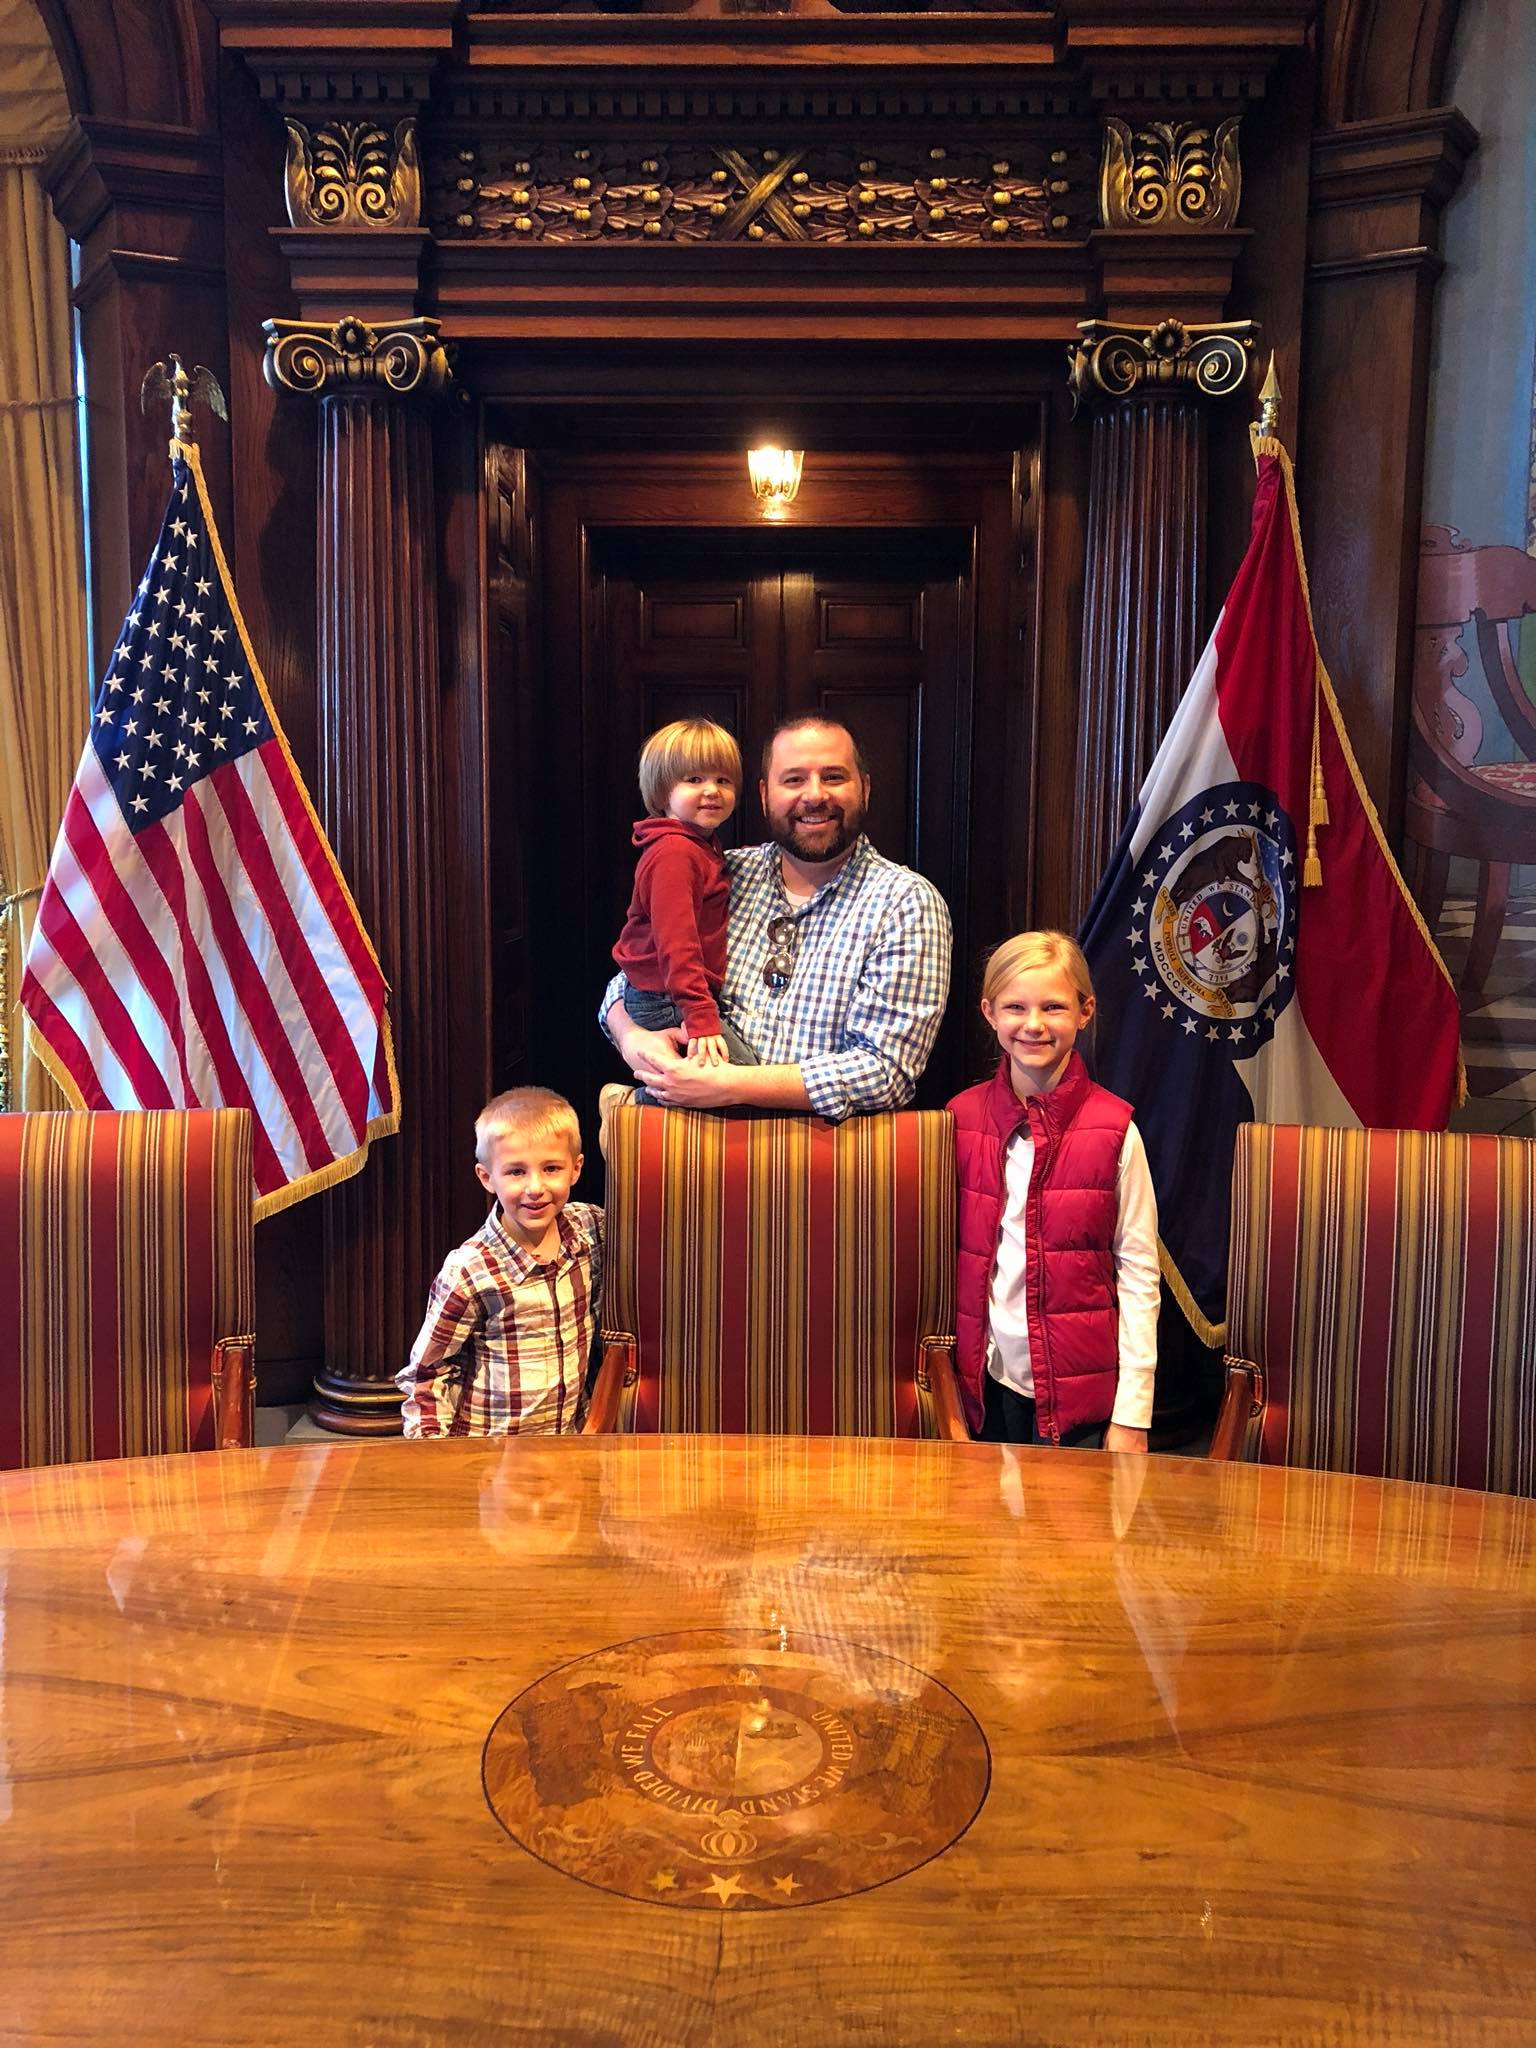 Michael and his three kids in the Missouri Governor's office.